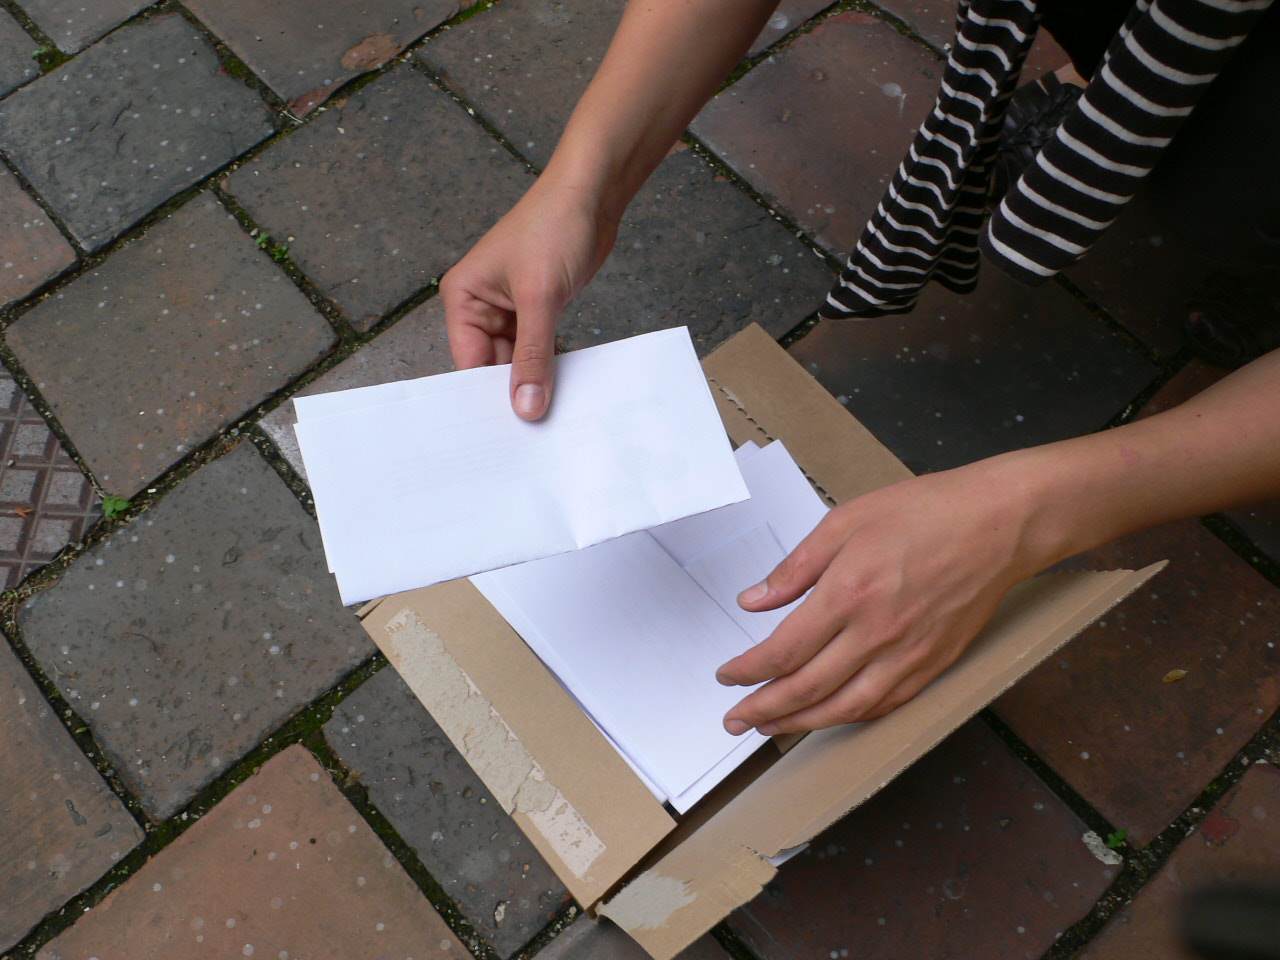  Ziehen des/der Gewinner/in / Drawing The Name Out Of The Box